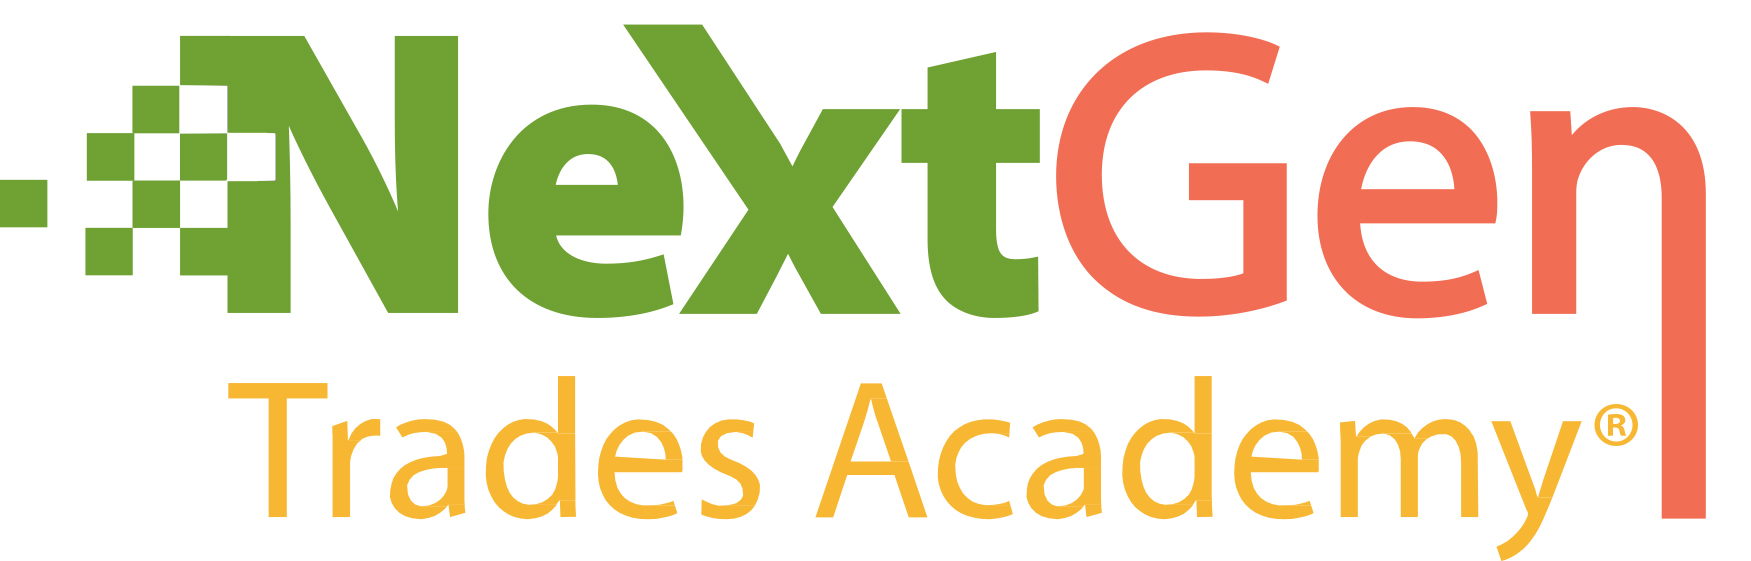 Logo of NextGen Trades Academy, featuring green and orange text with a stylized plus sign inset in green, designed to build skills for the future.